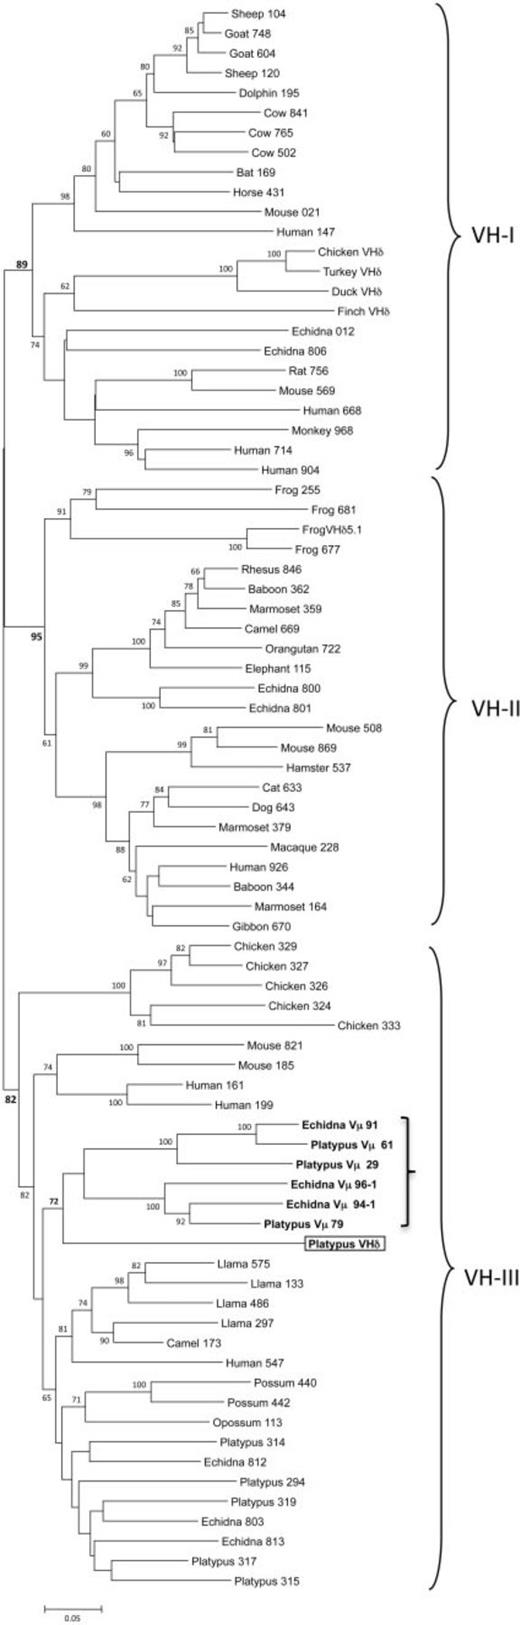 Fig. 3. Phylogenetic tree of mammalian VH genes including the platypus VHδ and monotreme Vµ. The three major VH clans are bracketed. The platypus VHδ is boxed and the clade containing platypus VHδ along with platypus and echidna Vµ is in bold and indicated by a smaller bracket in VH clan III. The three-digit numbers following the VH gene labels are the last three digits of the GenBank accession number referenced in supplementary table S2, Supplementary Material online. The numbers following the platypus and echidna Vµ labels are clone numbers. The tree presented was generated using the Minimum Evolution method. Similar topology was generation using the Neighbor Joining method.